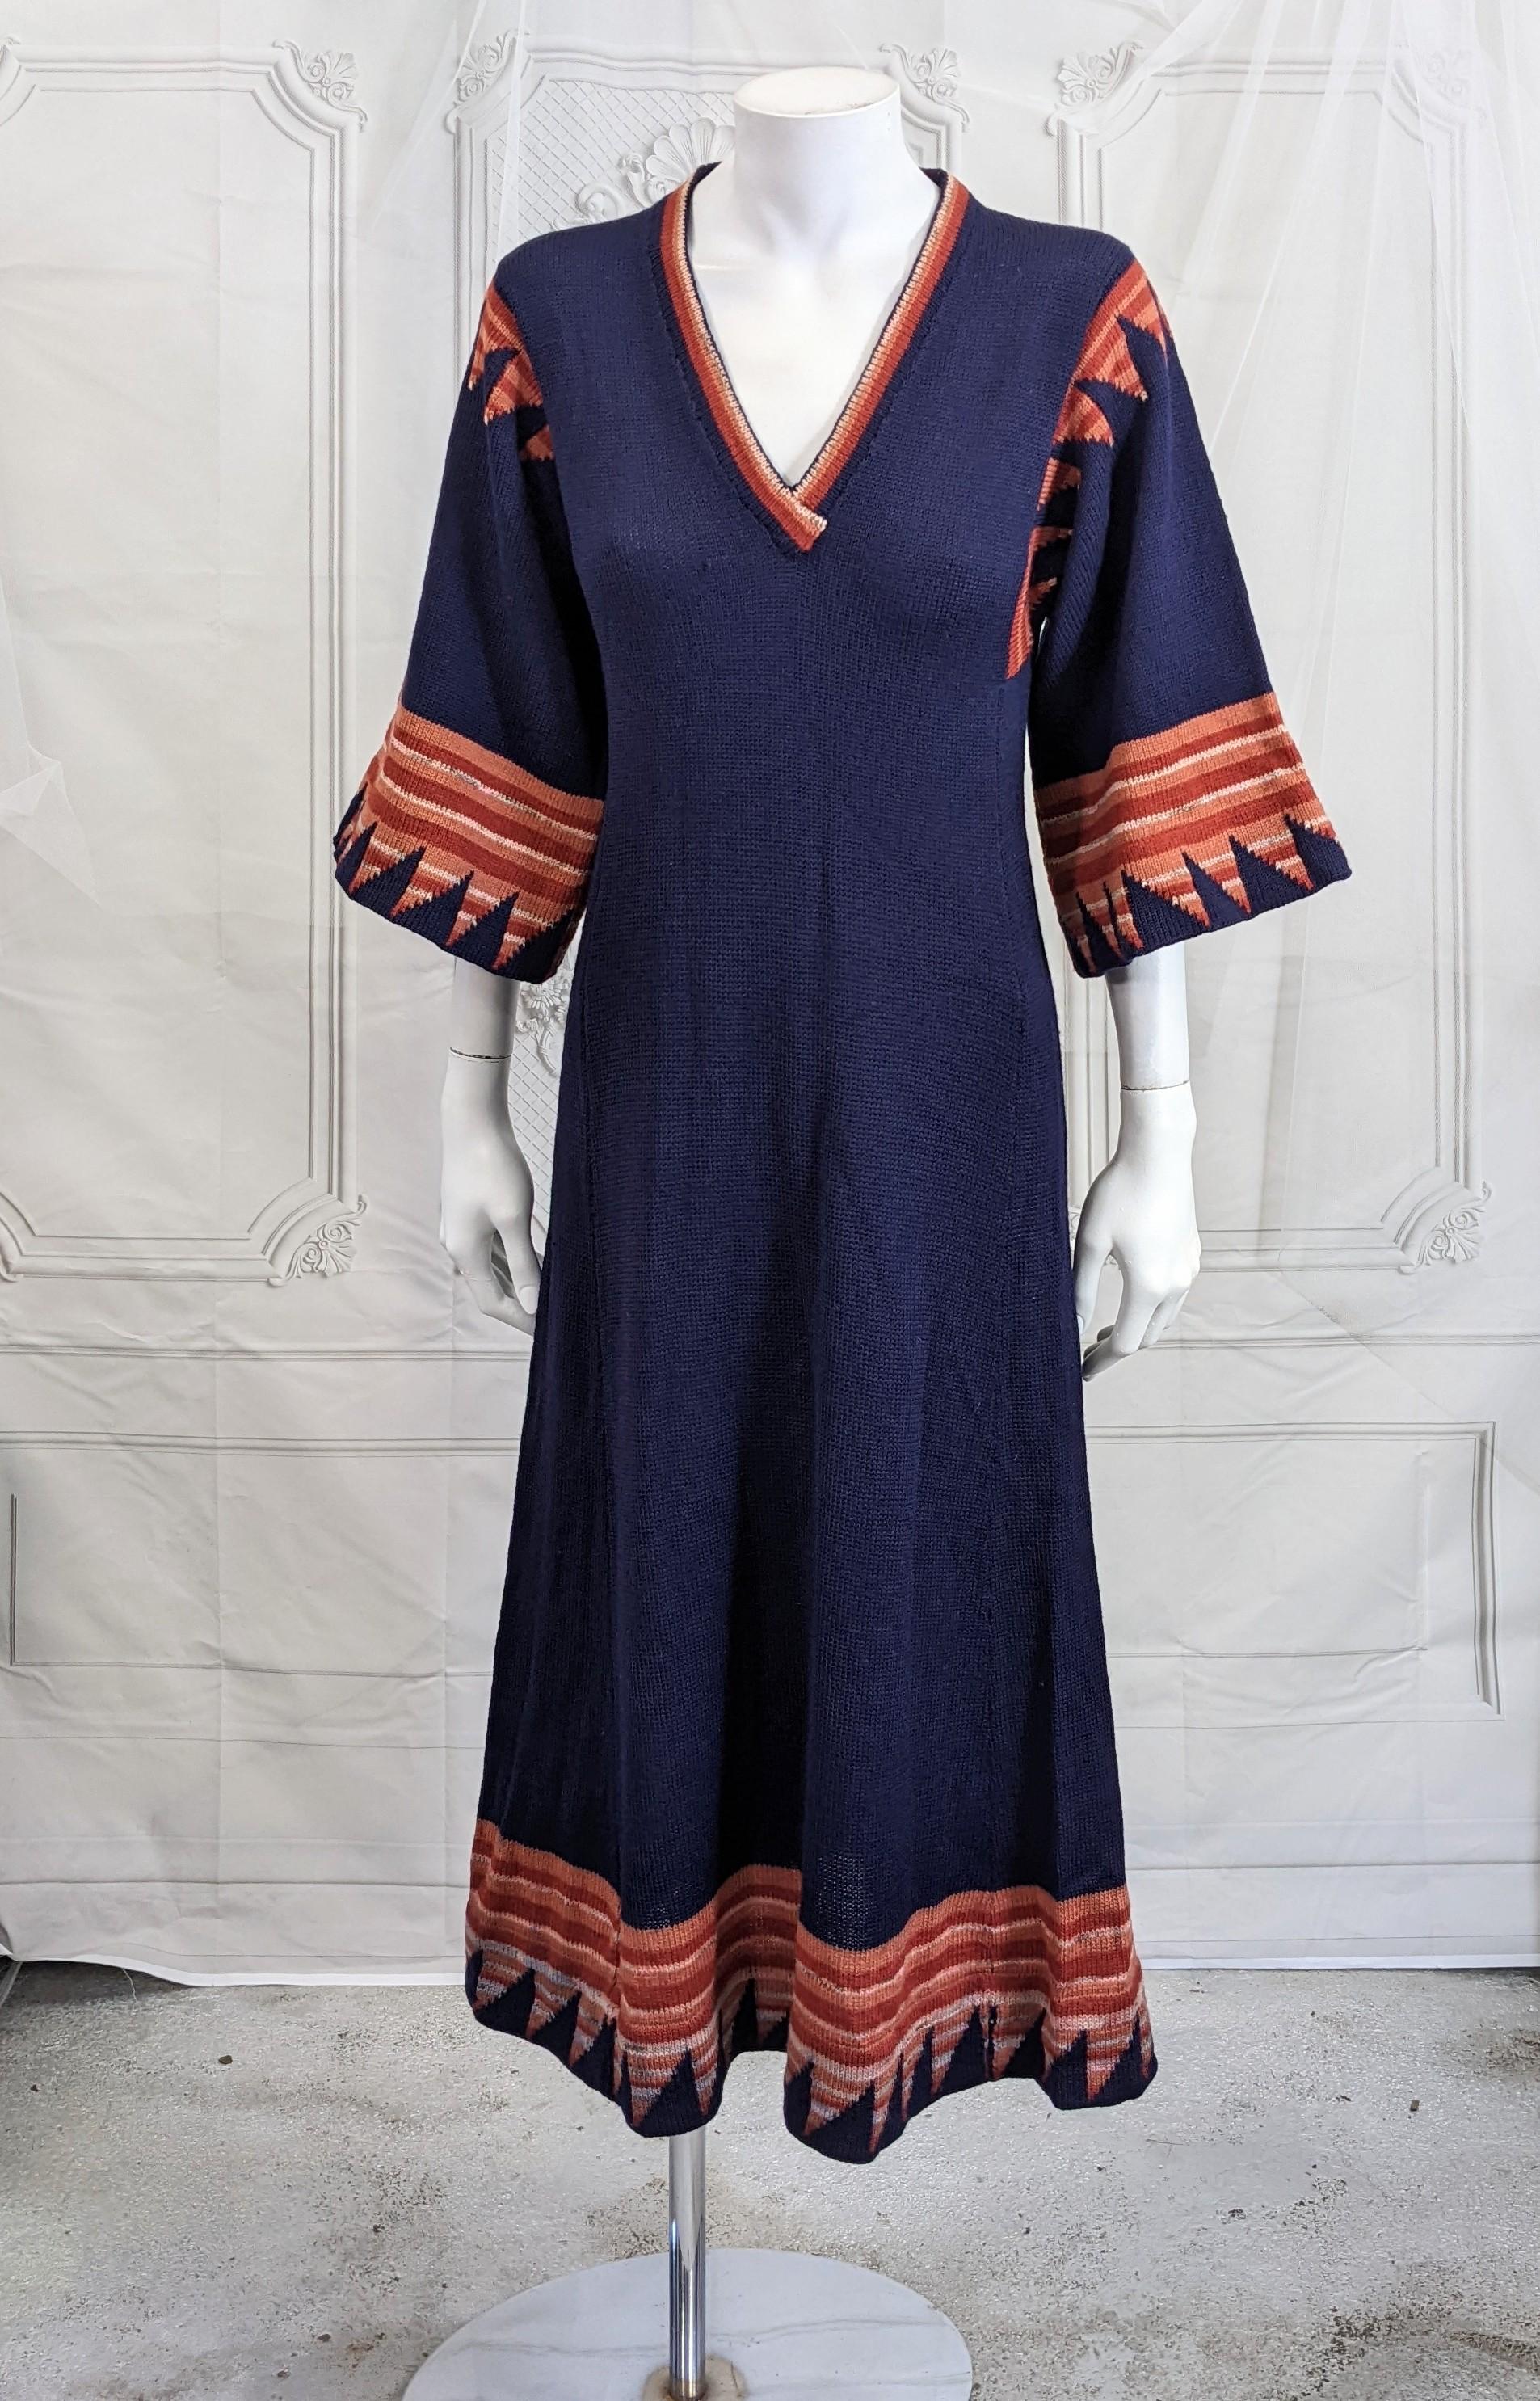 Charming Wool blend A Line long navy knit 1970's Dress, by Ulla Heathcoat, UK. Long paneled dress in navy wool blend knit with contrast bands at kimono sleeves and hem. 
Bust 30